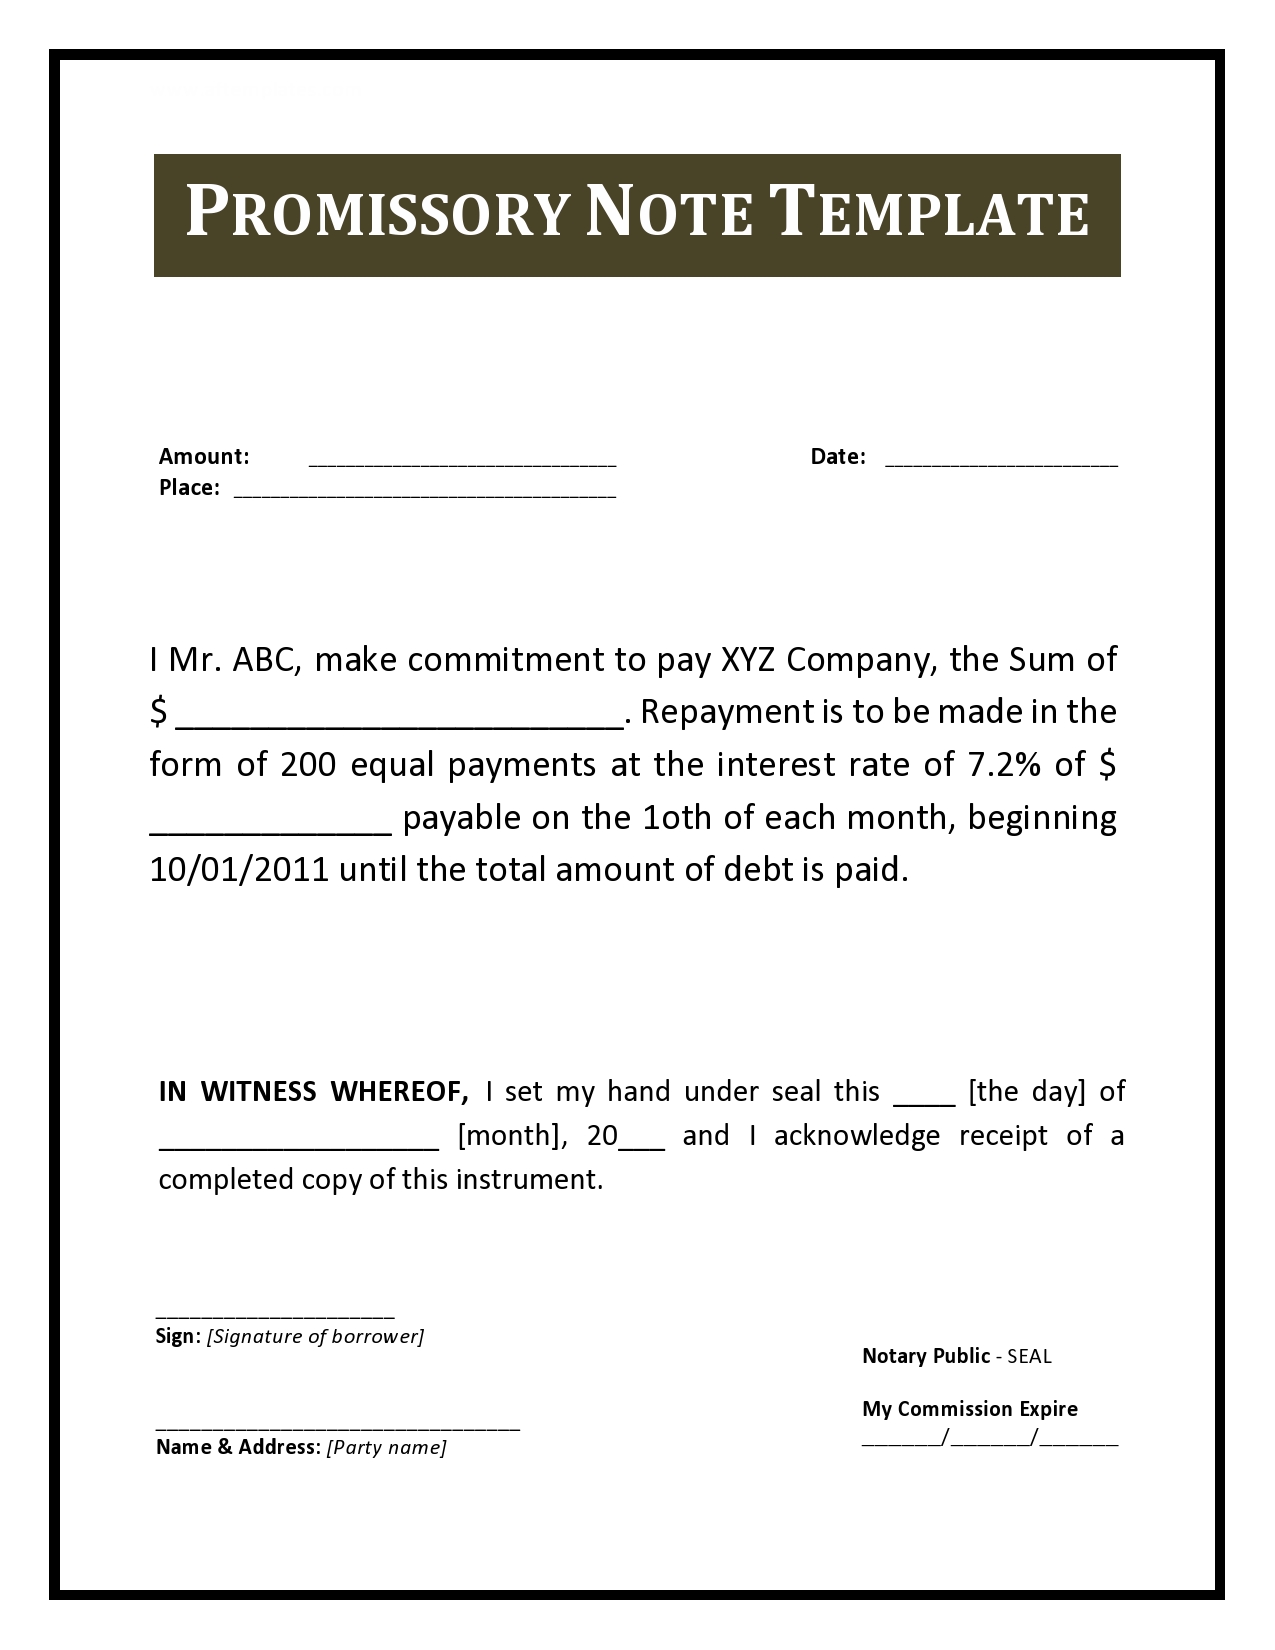 Free promissory note template 32